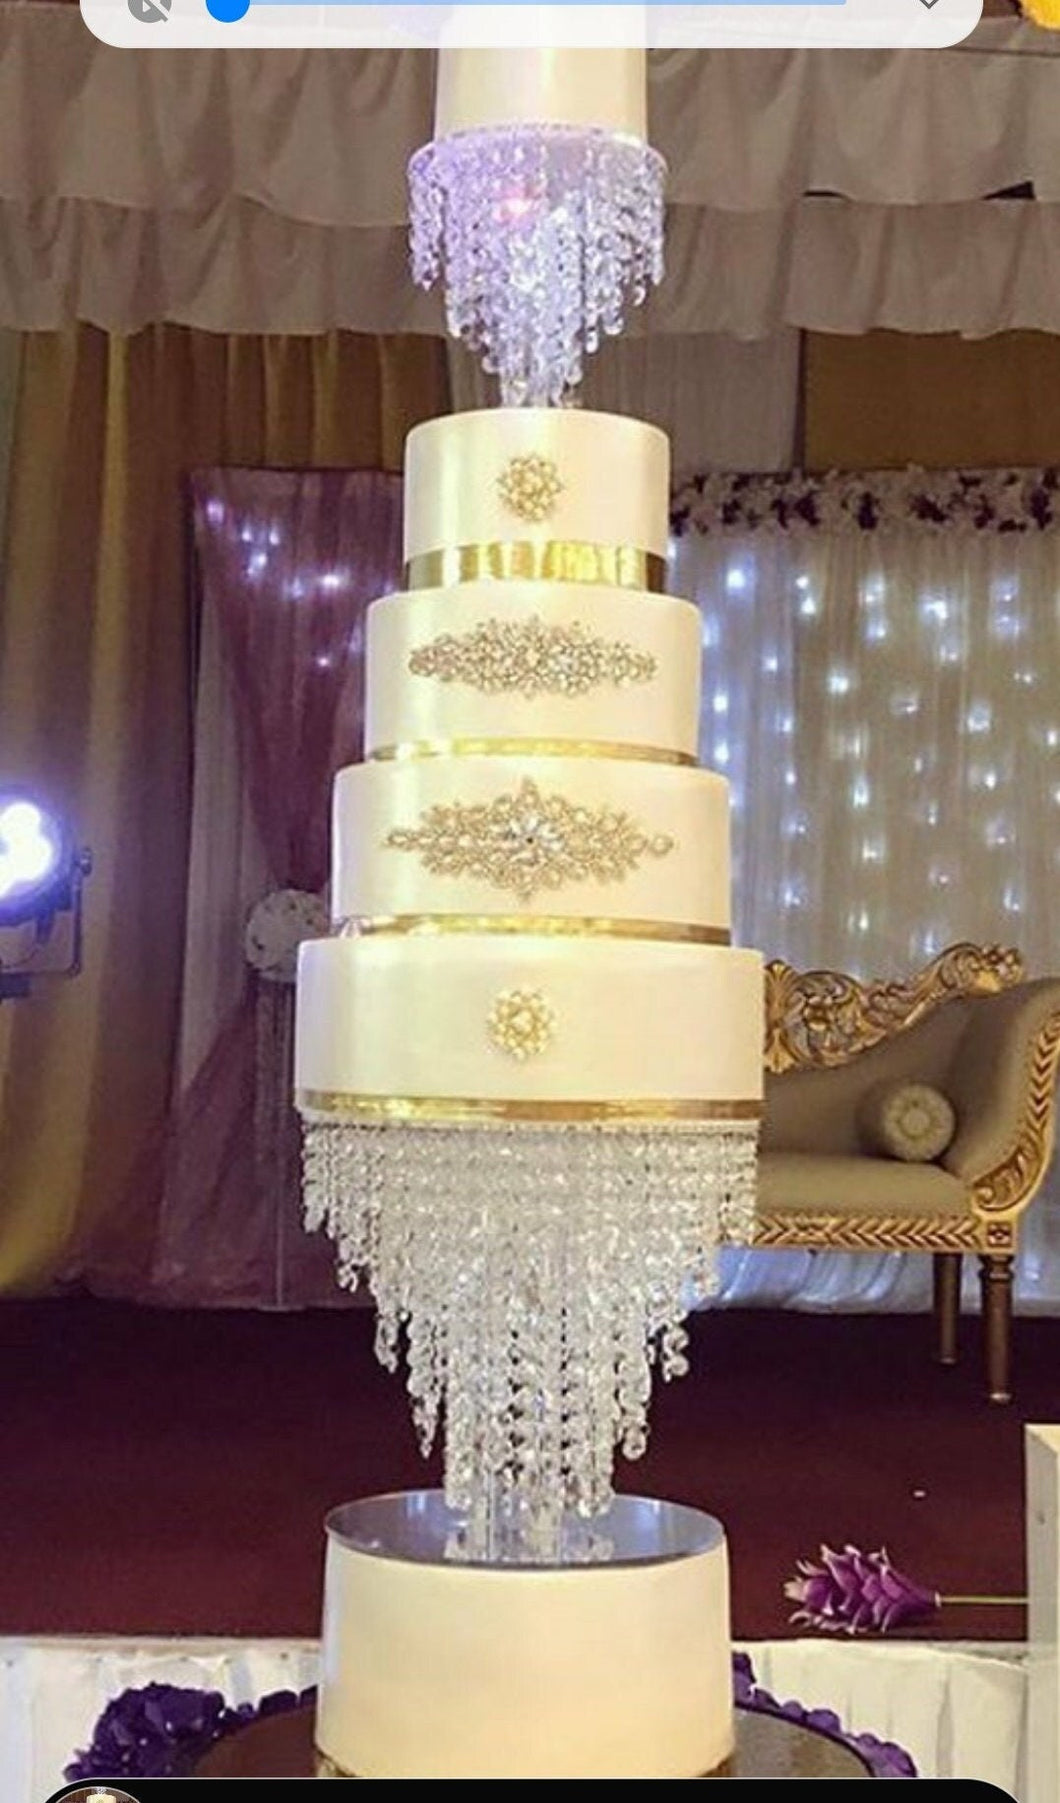 Crystal cake sepearator, diamante cake stand, chandelier wedding cake stand, faux-glass crystal plus led fairy lights by Crystal wedding uk